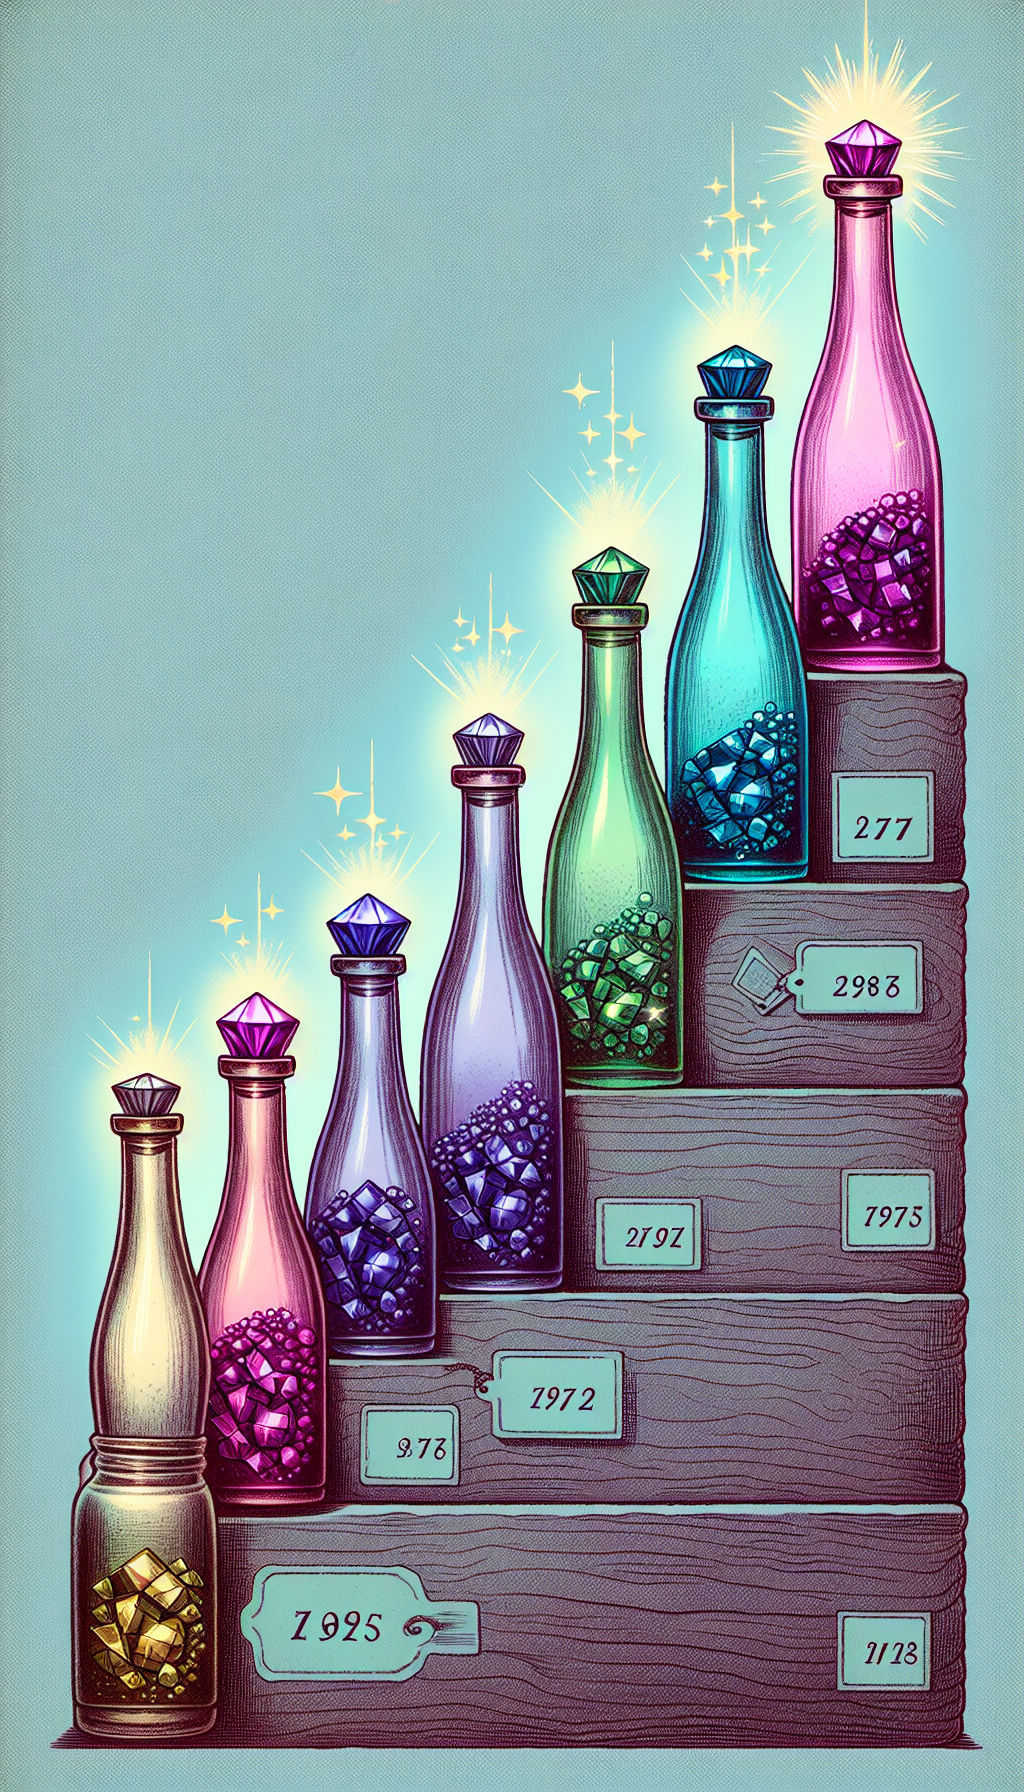 An illustration depicts an ascending row of antique bottles, each tinted with a gradient representing the color spectrum from common aqua to rare amethyst. As the bottles ascend, they transform into precious gems, with the rarest at the peak emitting sparkles, symbolizing their high value, while a price tag attached to each bottle displays increasing amounts.